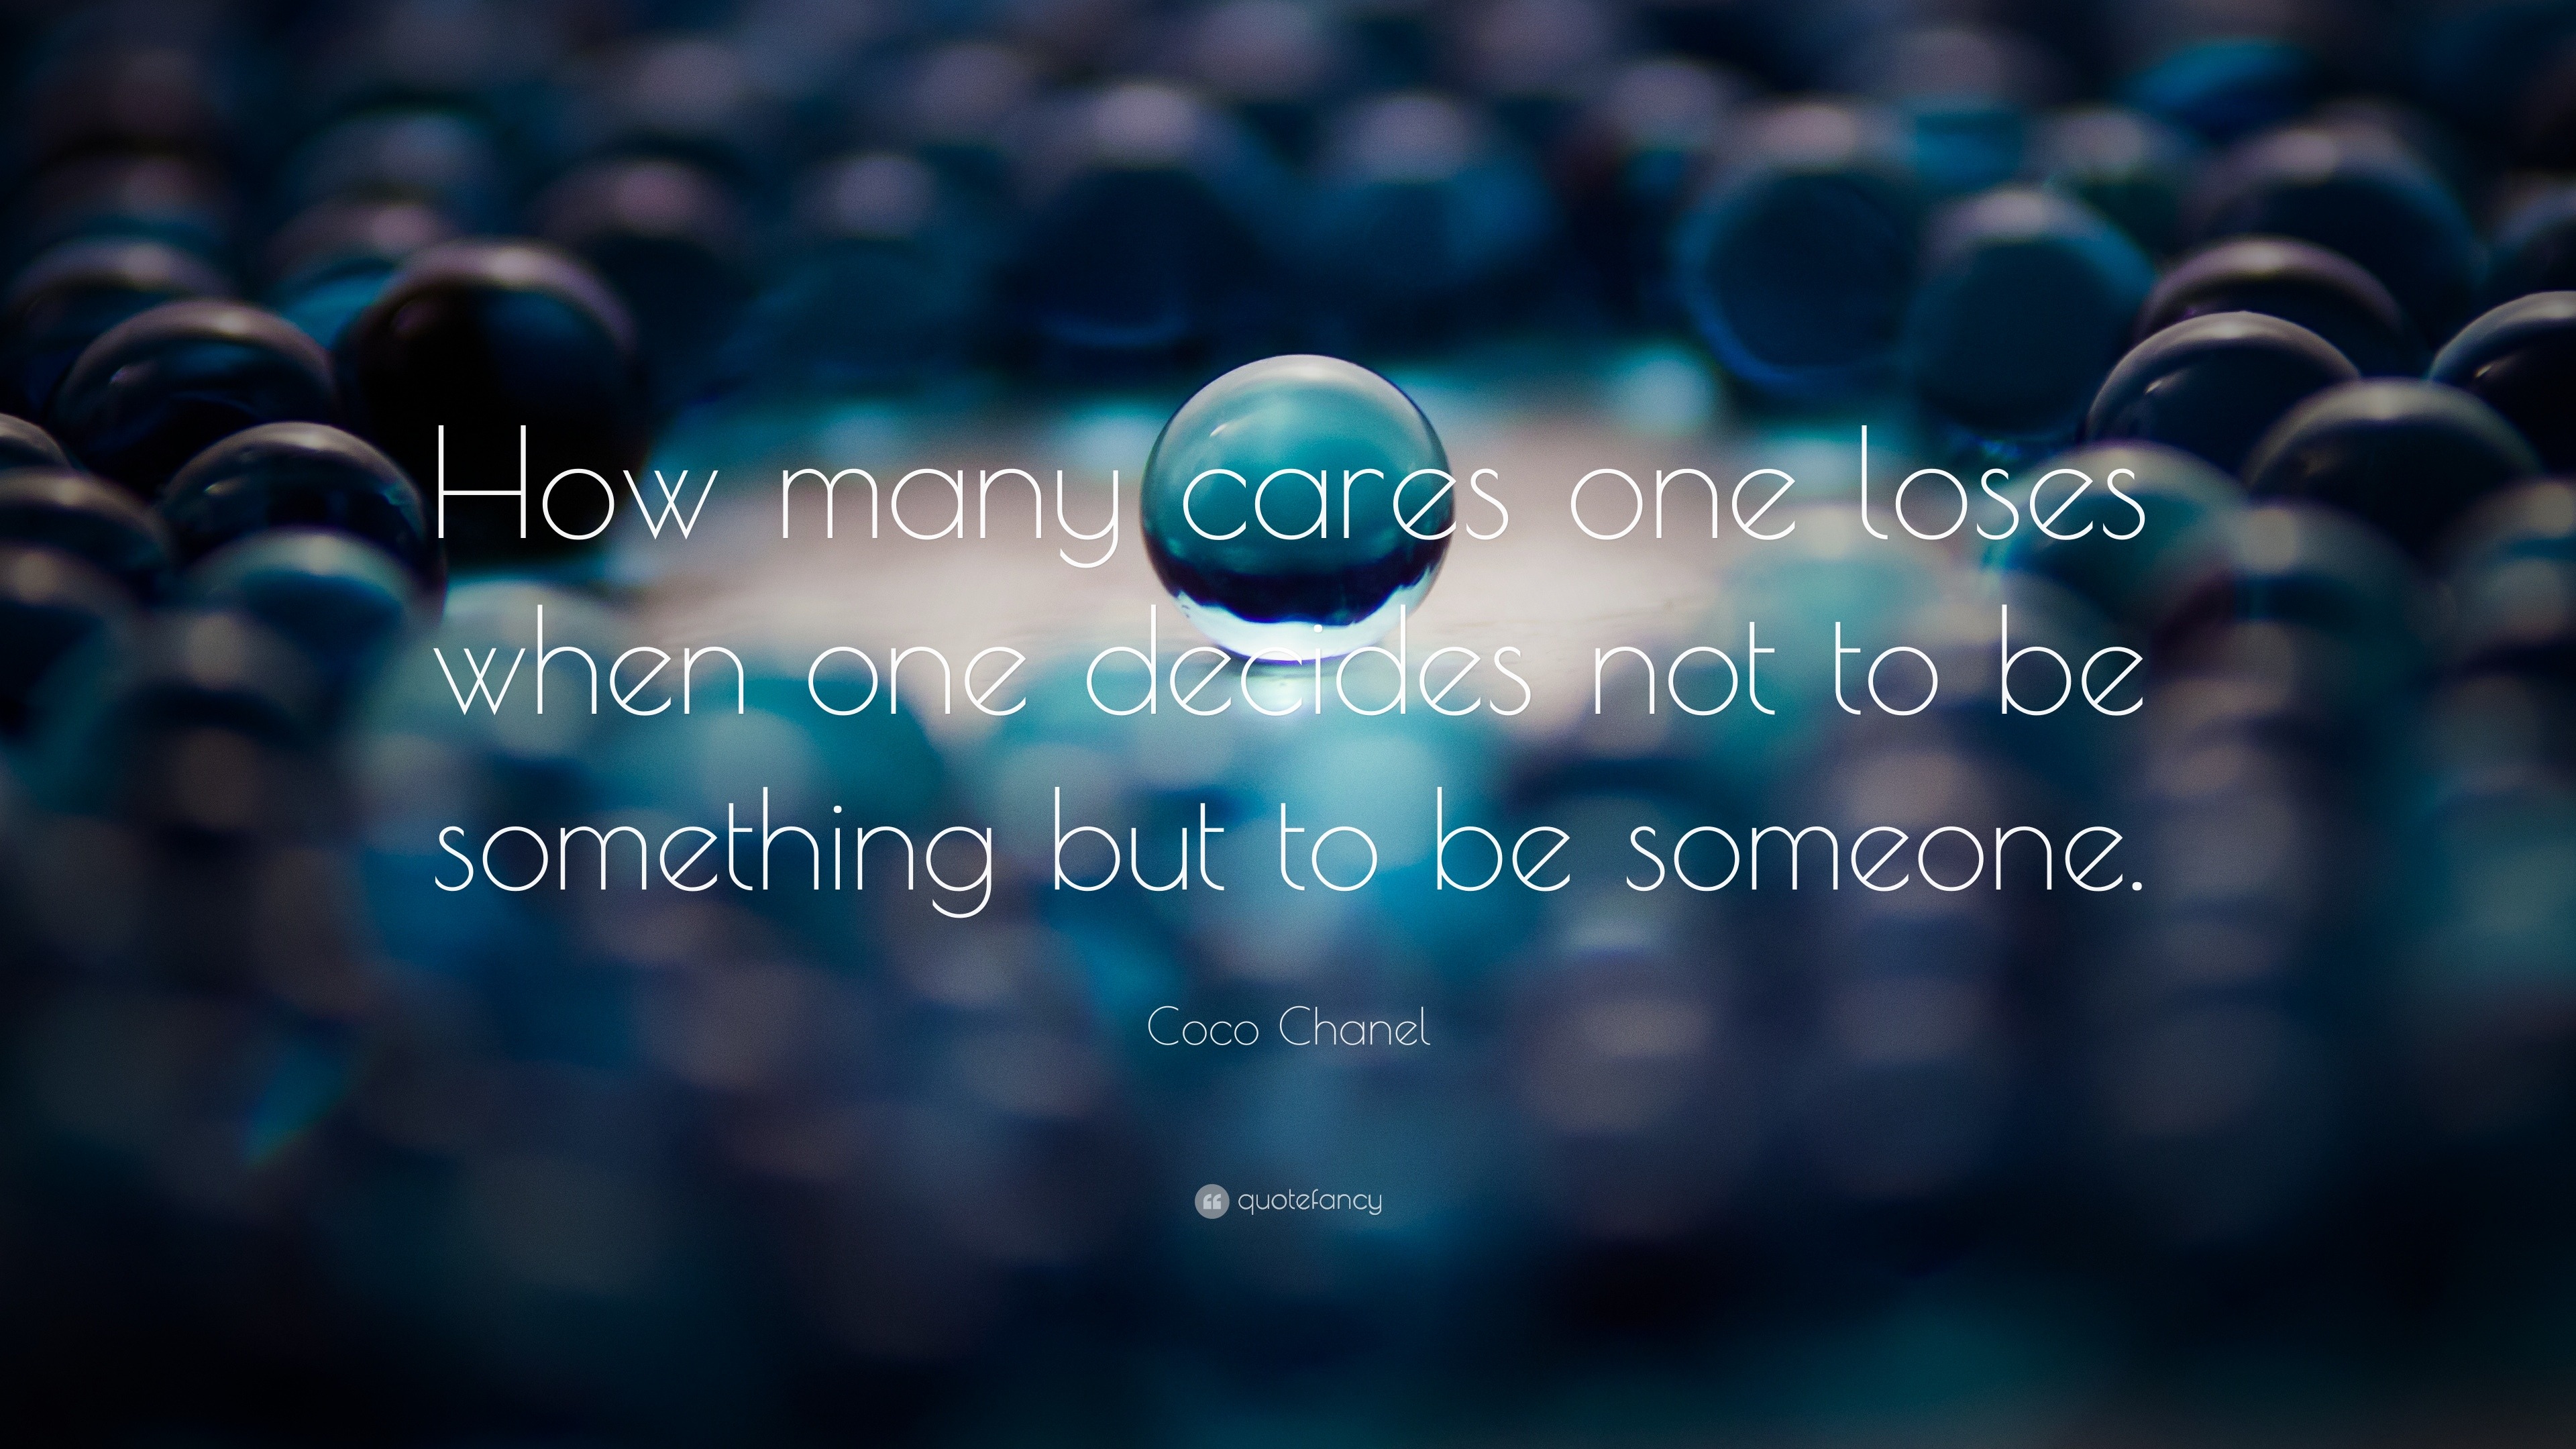 Coco Chanel Quote: “How many cares one loses when one decides not to be  something but